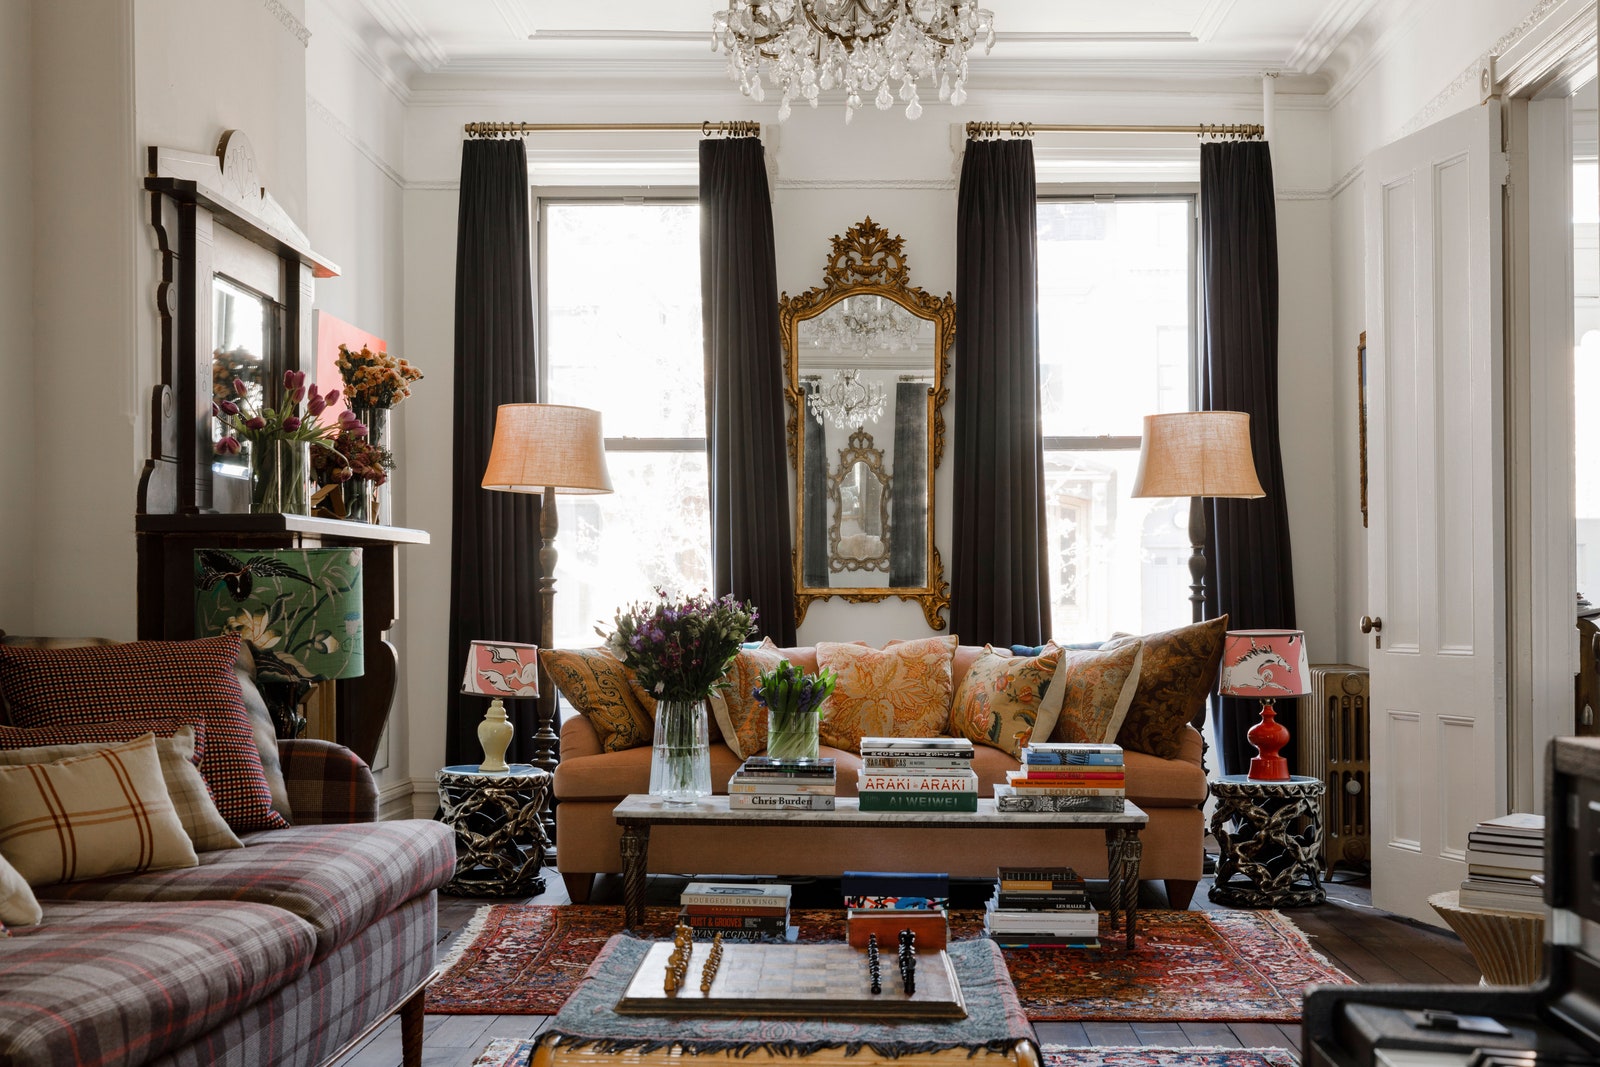 Living room of a New York brownstone home with a gilded mirror flanked by two tall windows chandelier hanging from...